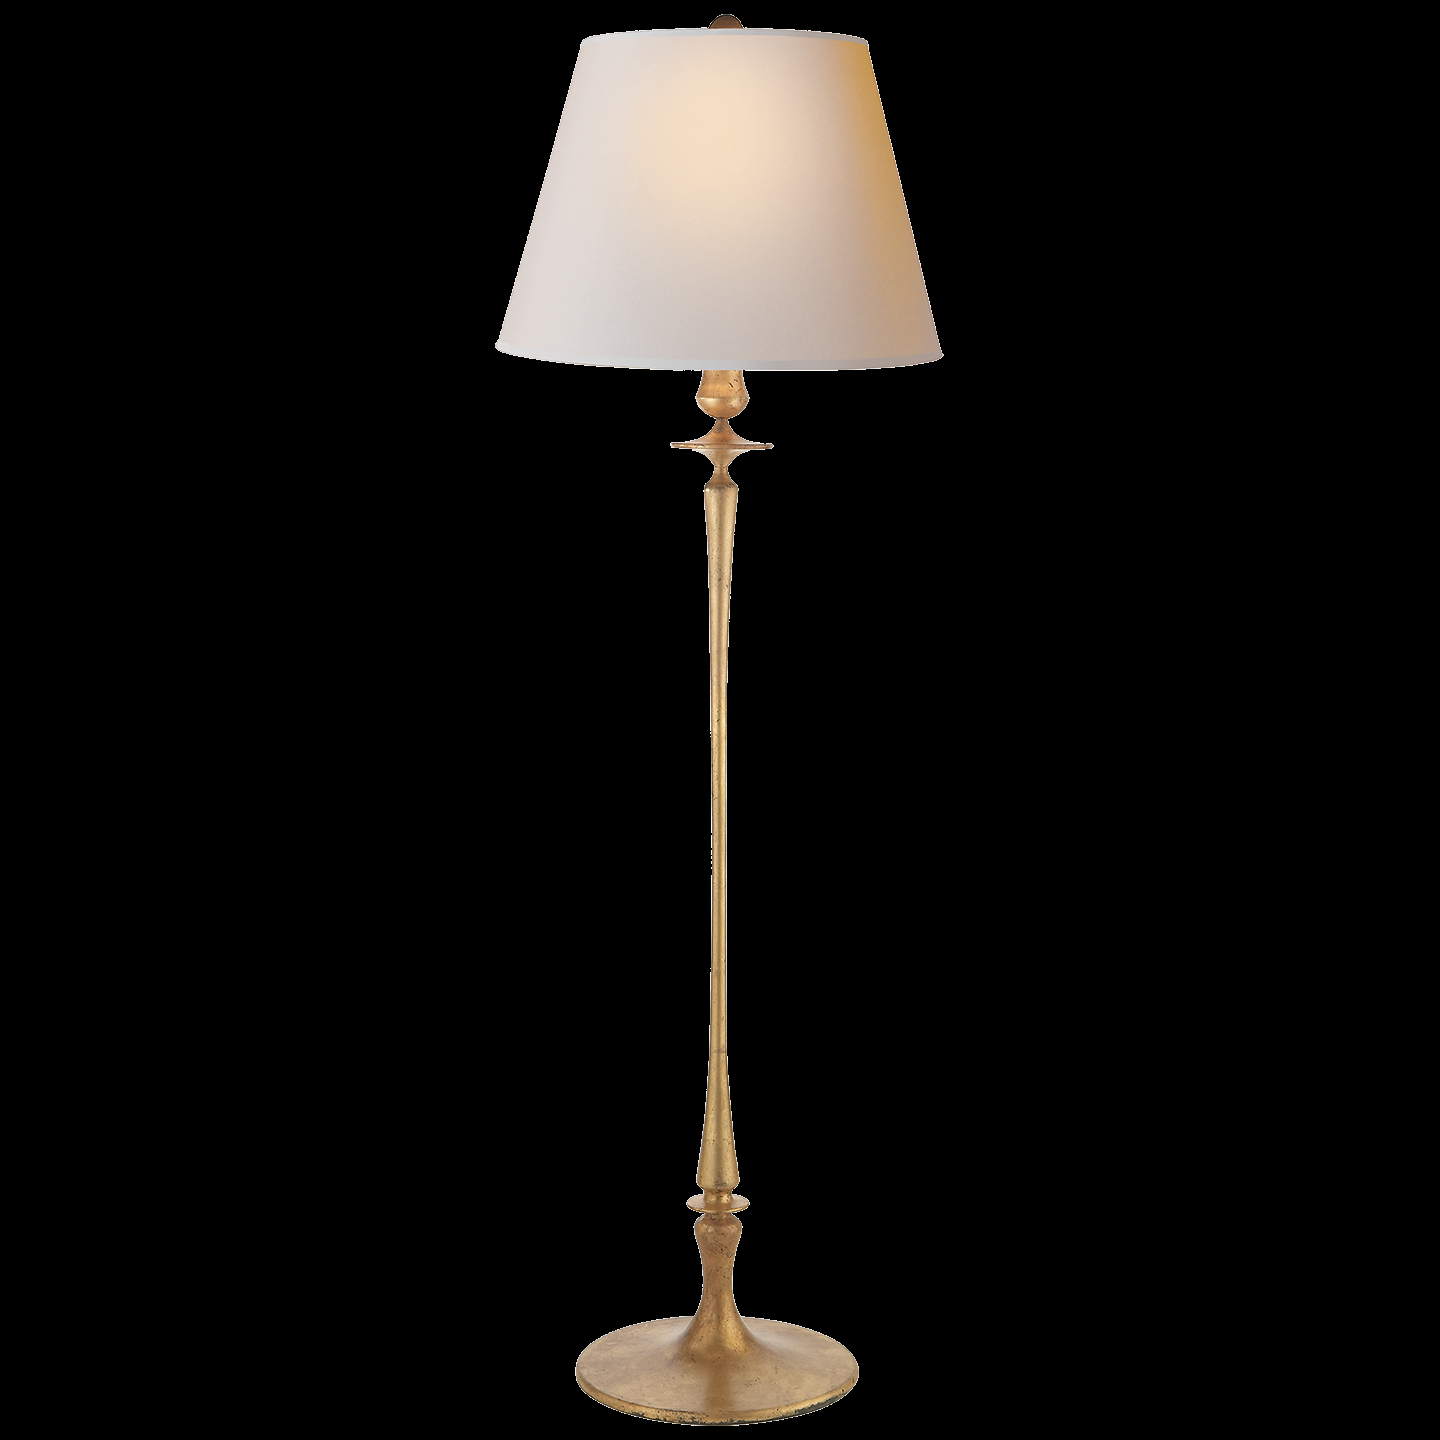 Rome Grande Floor Lamp Jp Mbr In 2019 Decorative Floor within sizing 1440 X 1440